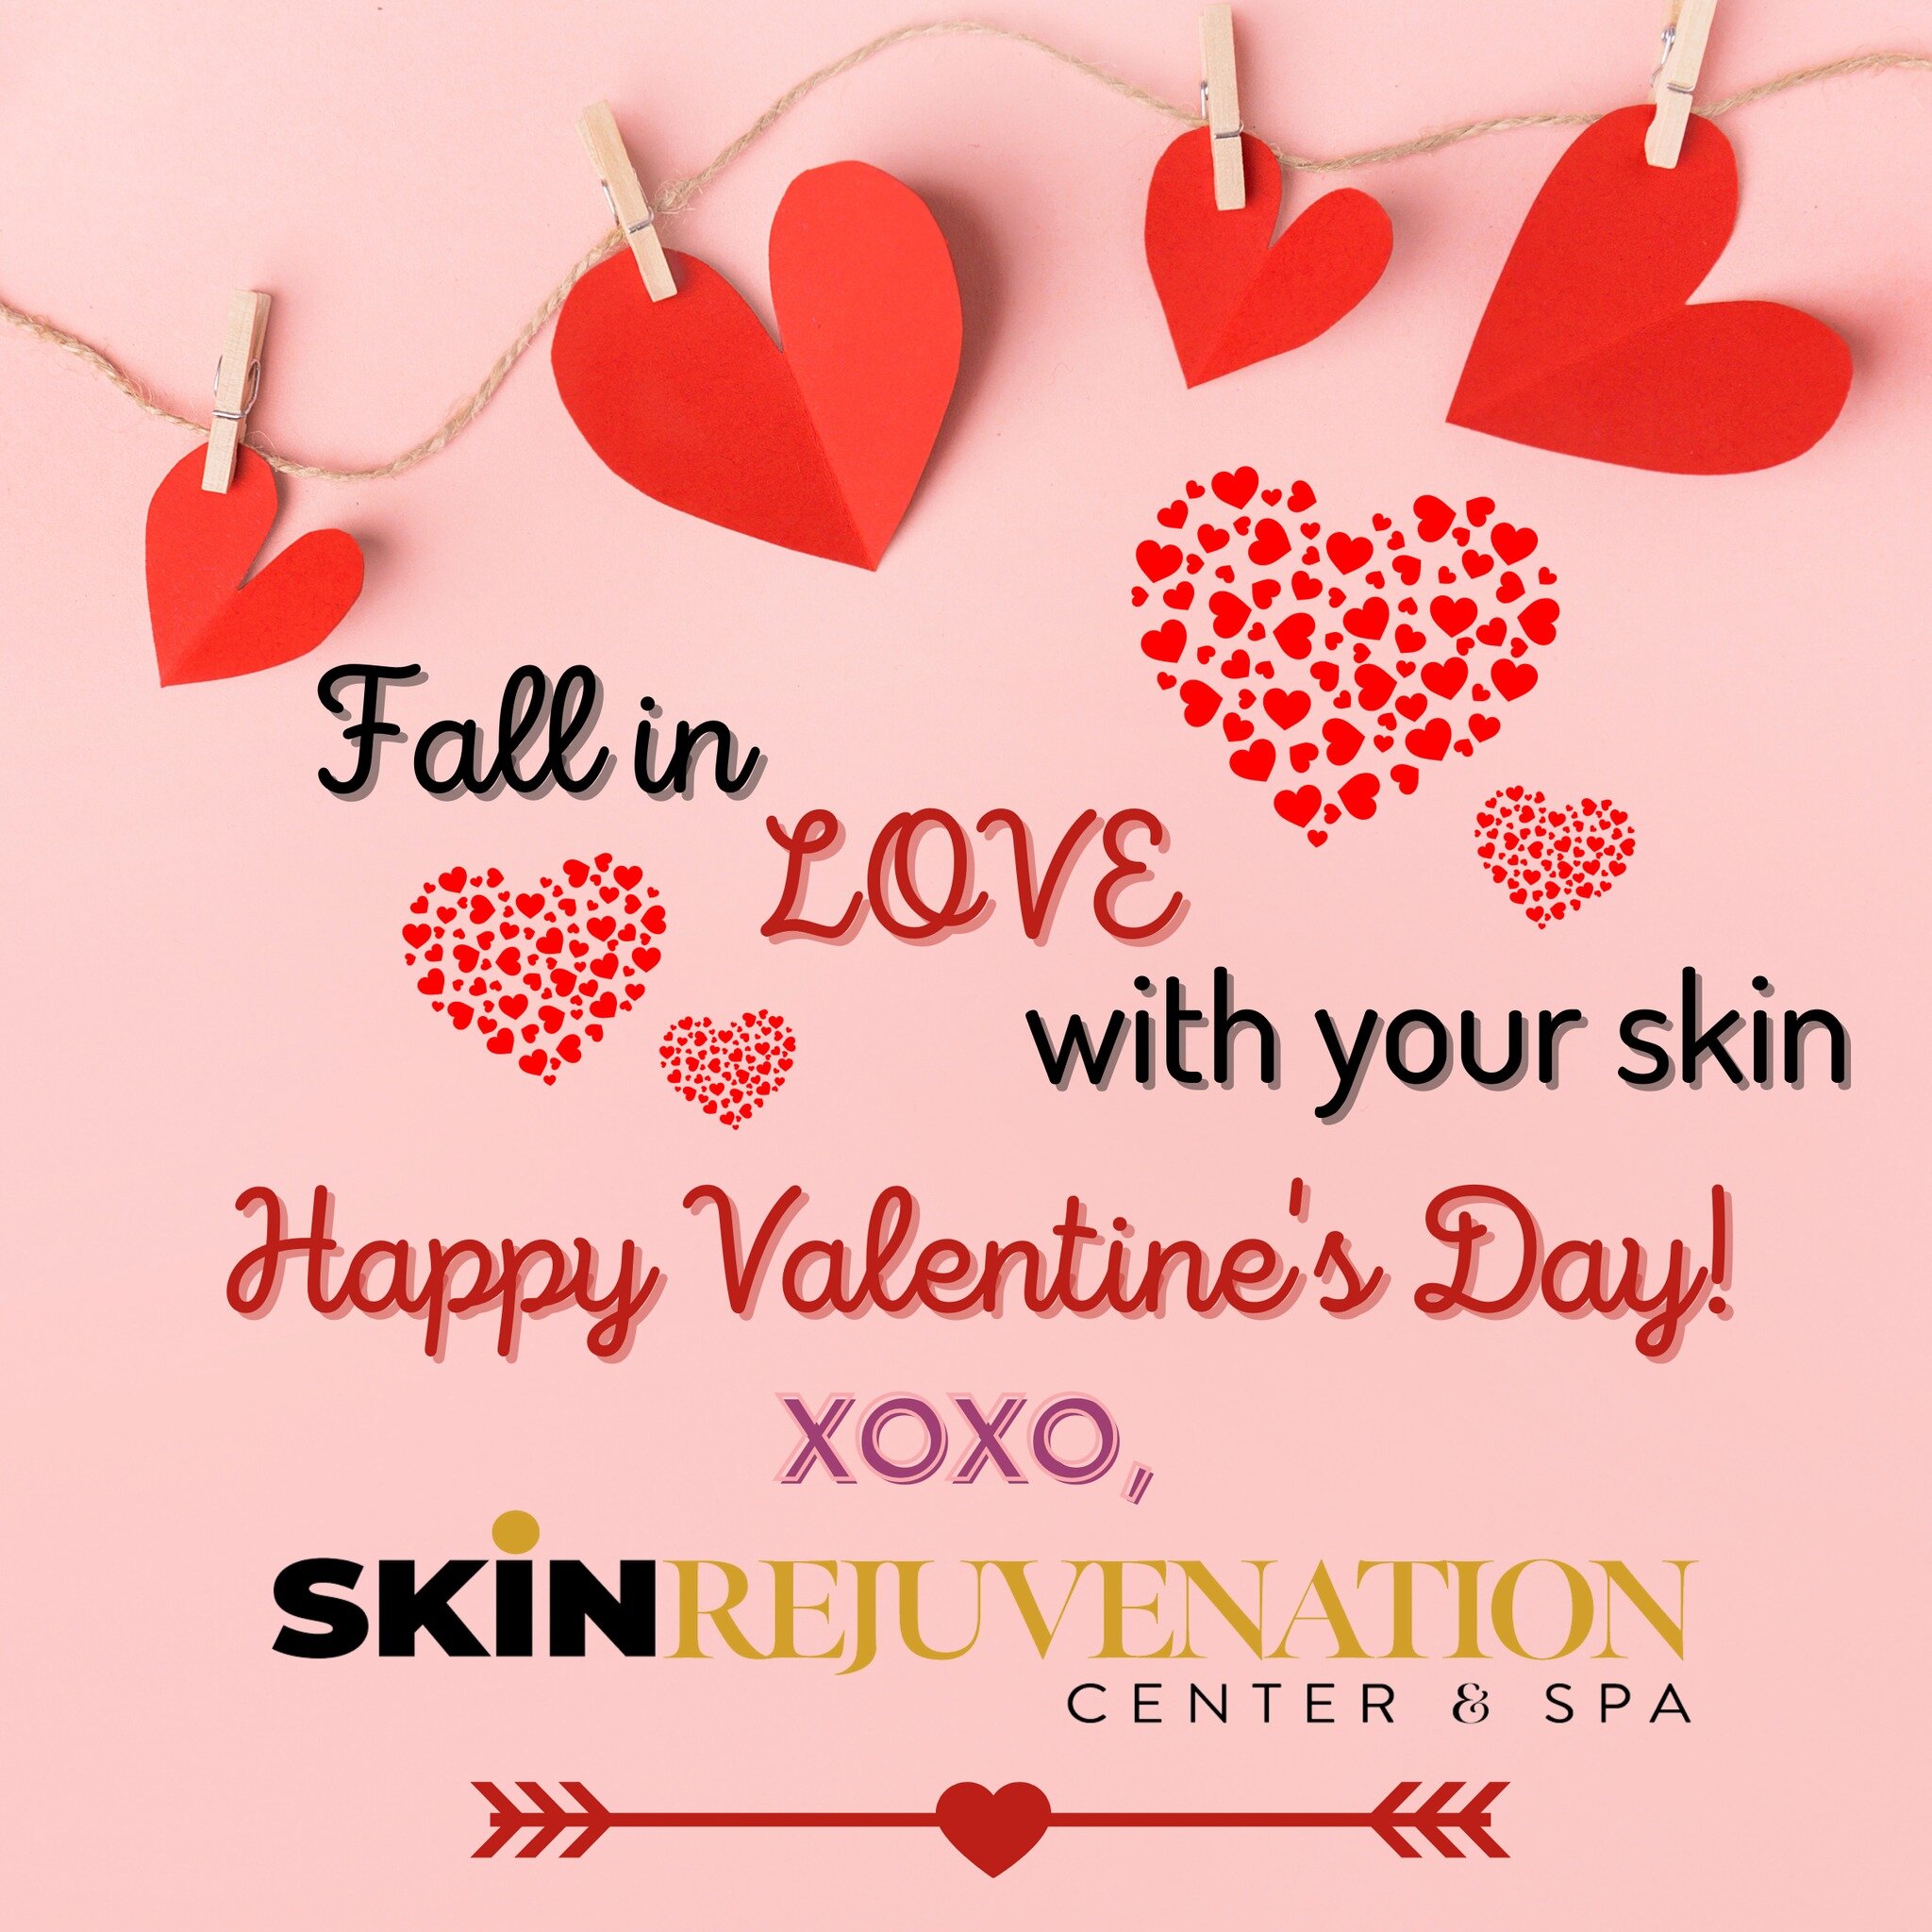 Happy Valentine's Day from all of us at Skin Rejuvenation Center! We love all our clients and helping them love their skin! 

XOXO, Saundra, Melory, Katie, Mika &amp; Teddy ❤💋

 #xoxo #loveandhappiness #healthyskin #skincareproducts #youthfulskin #s